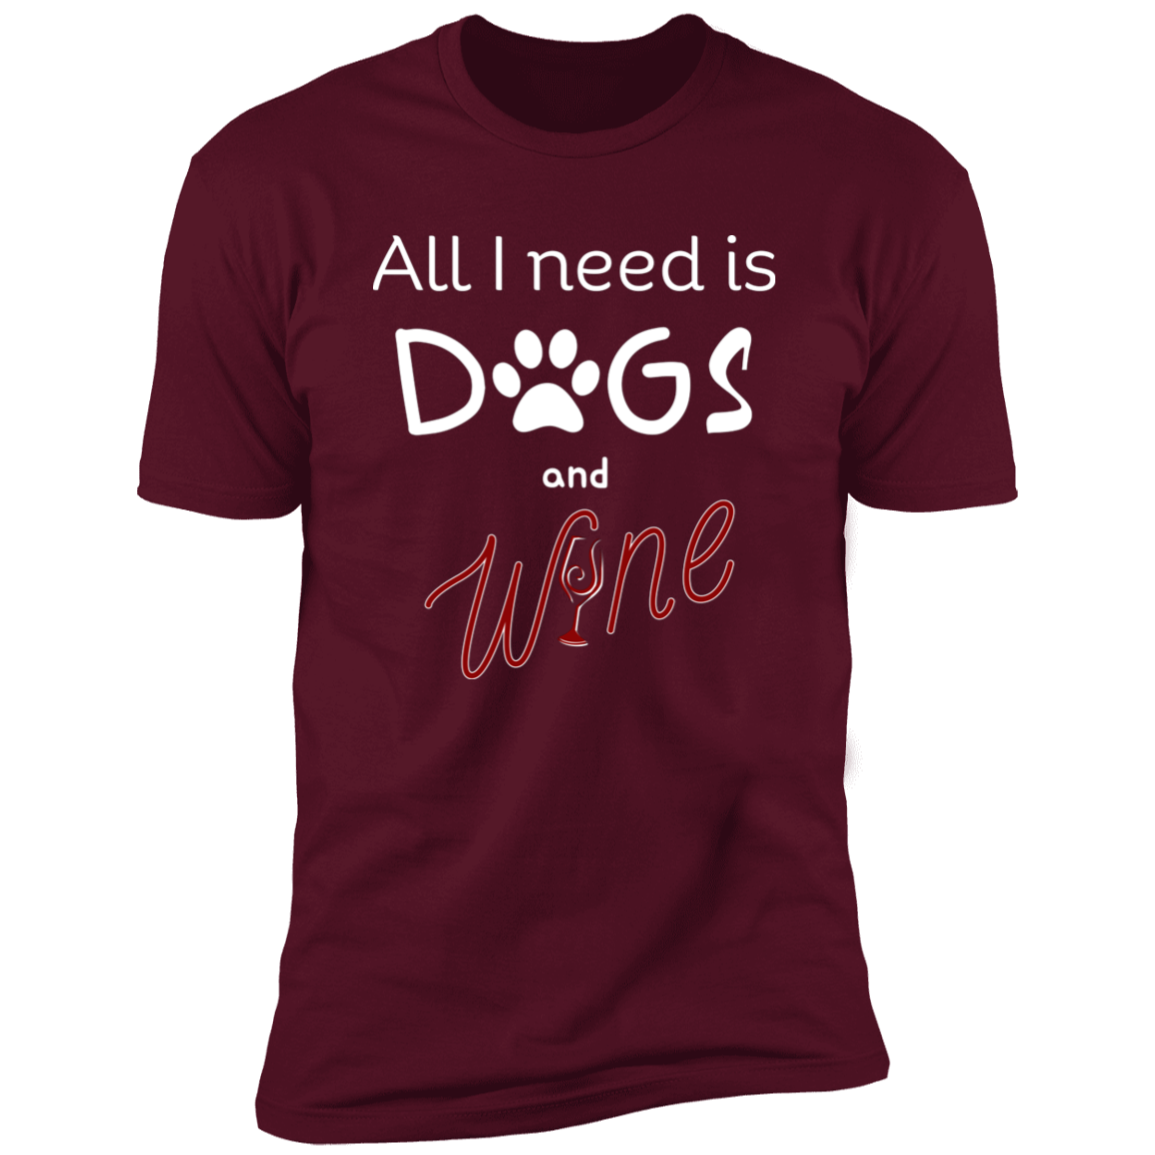 All I Need is Dogs and Wine T-shirt, Dog Shirt for humans, in maroon